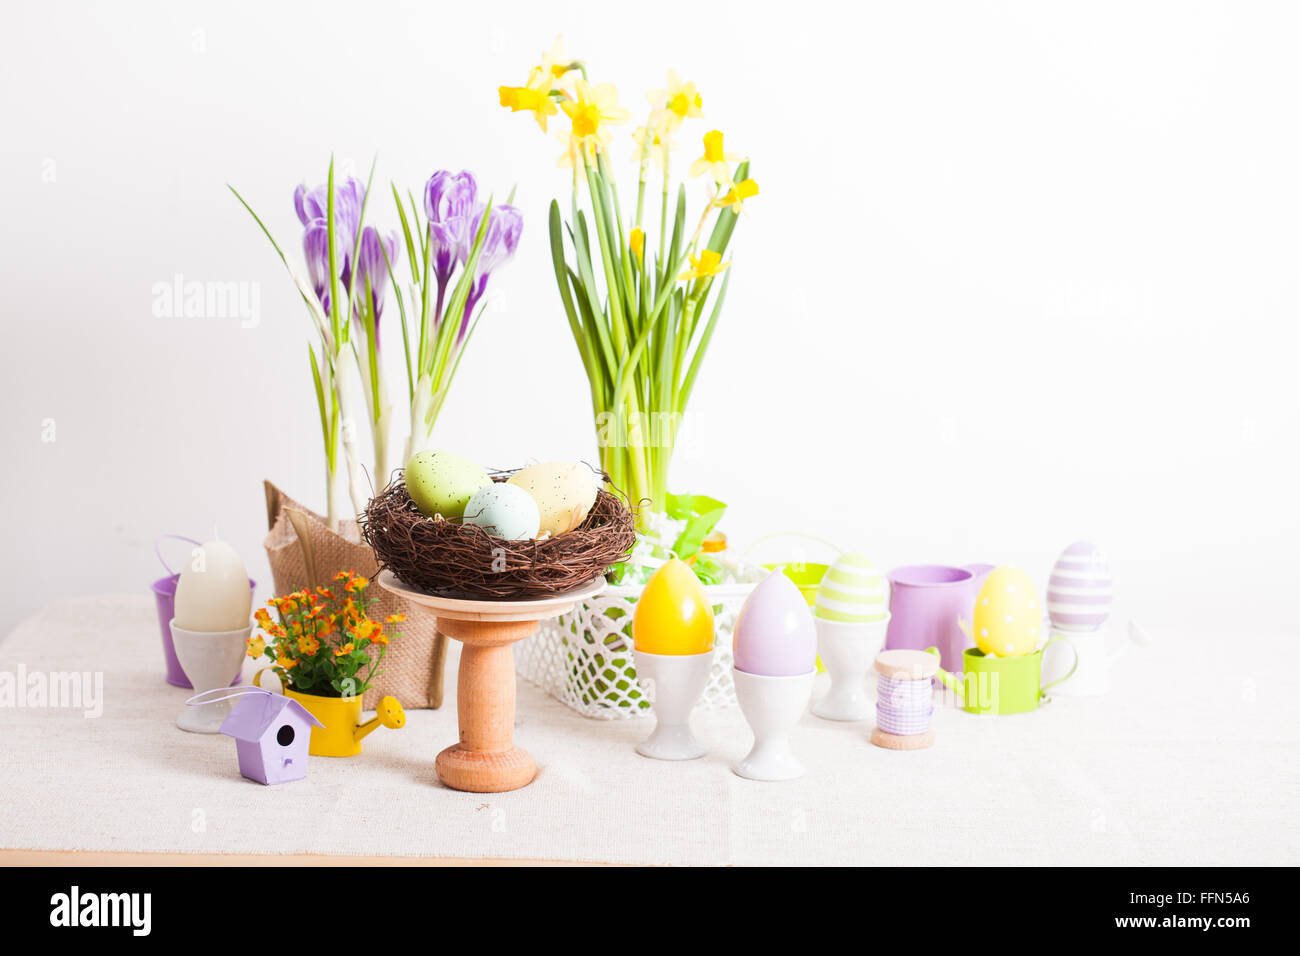 The Easter decorations Stock Photo - Alamy